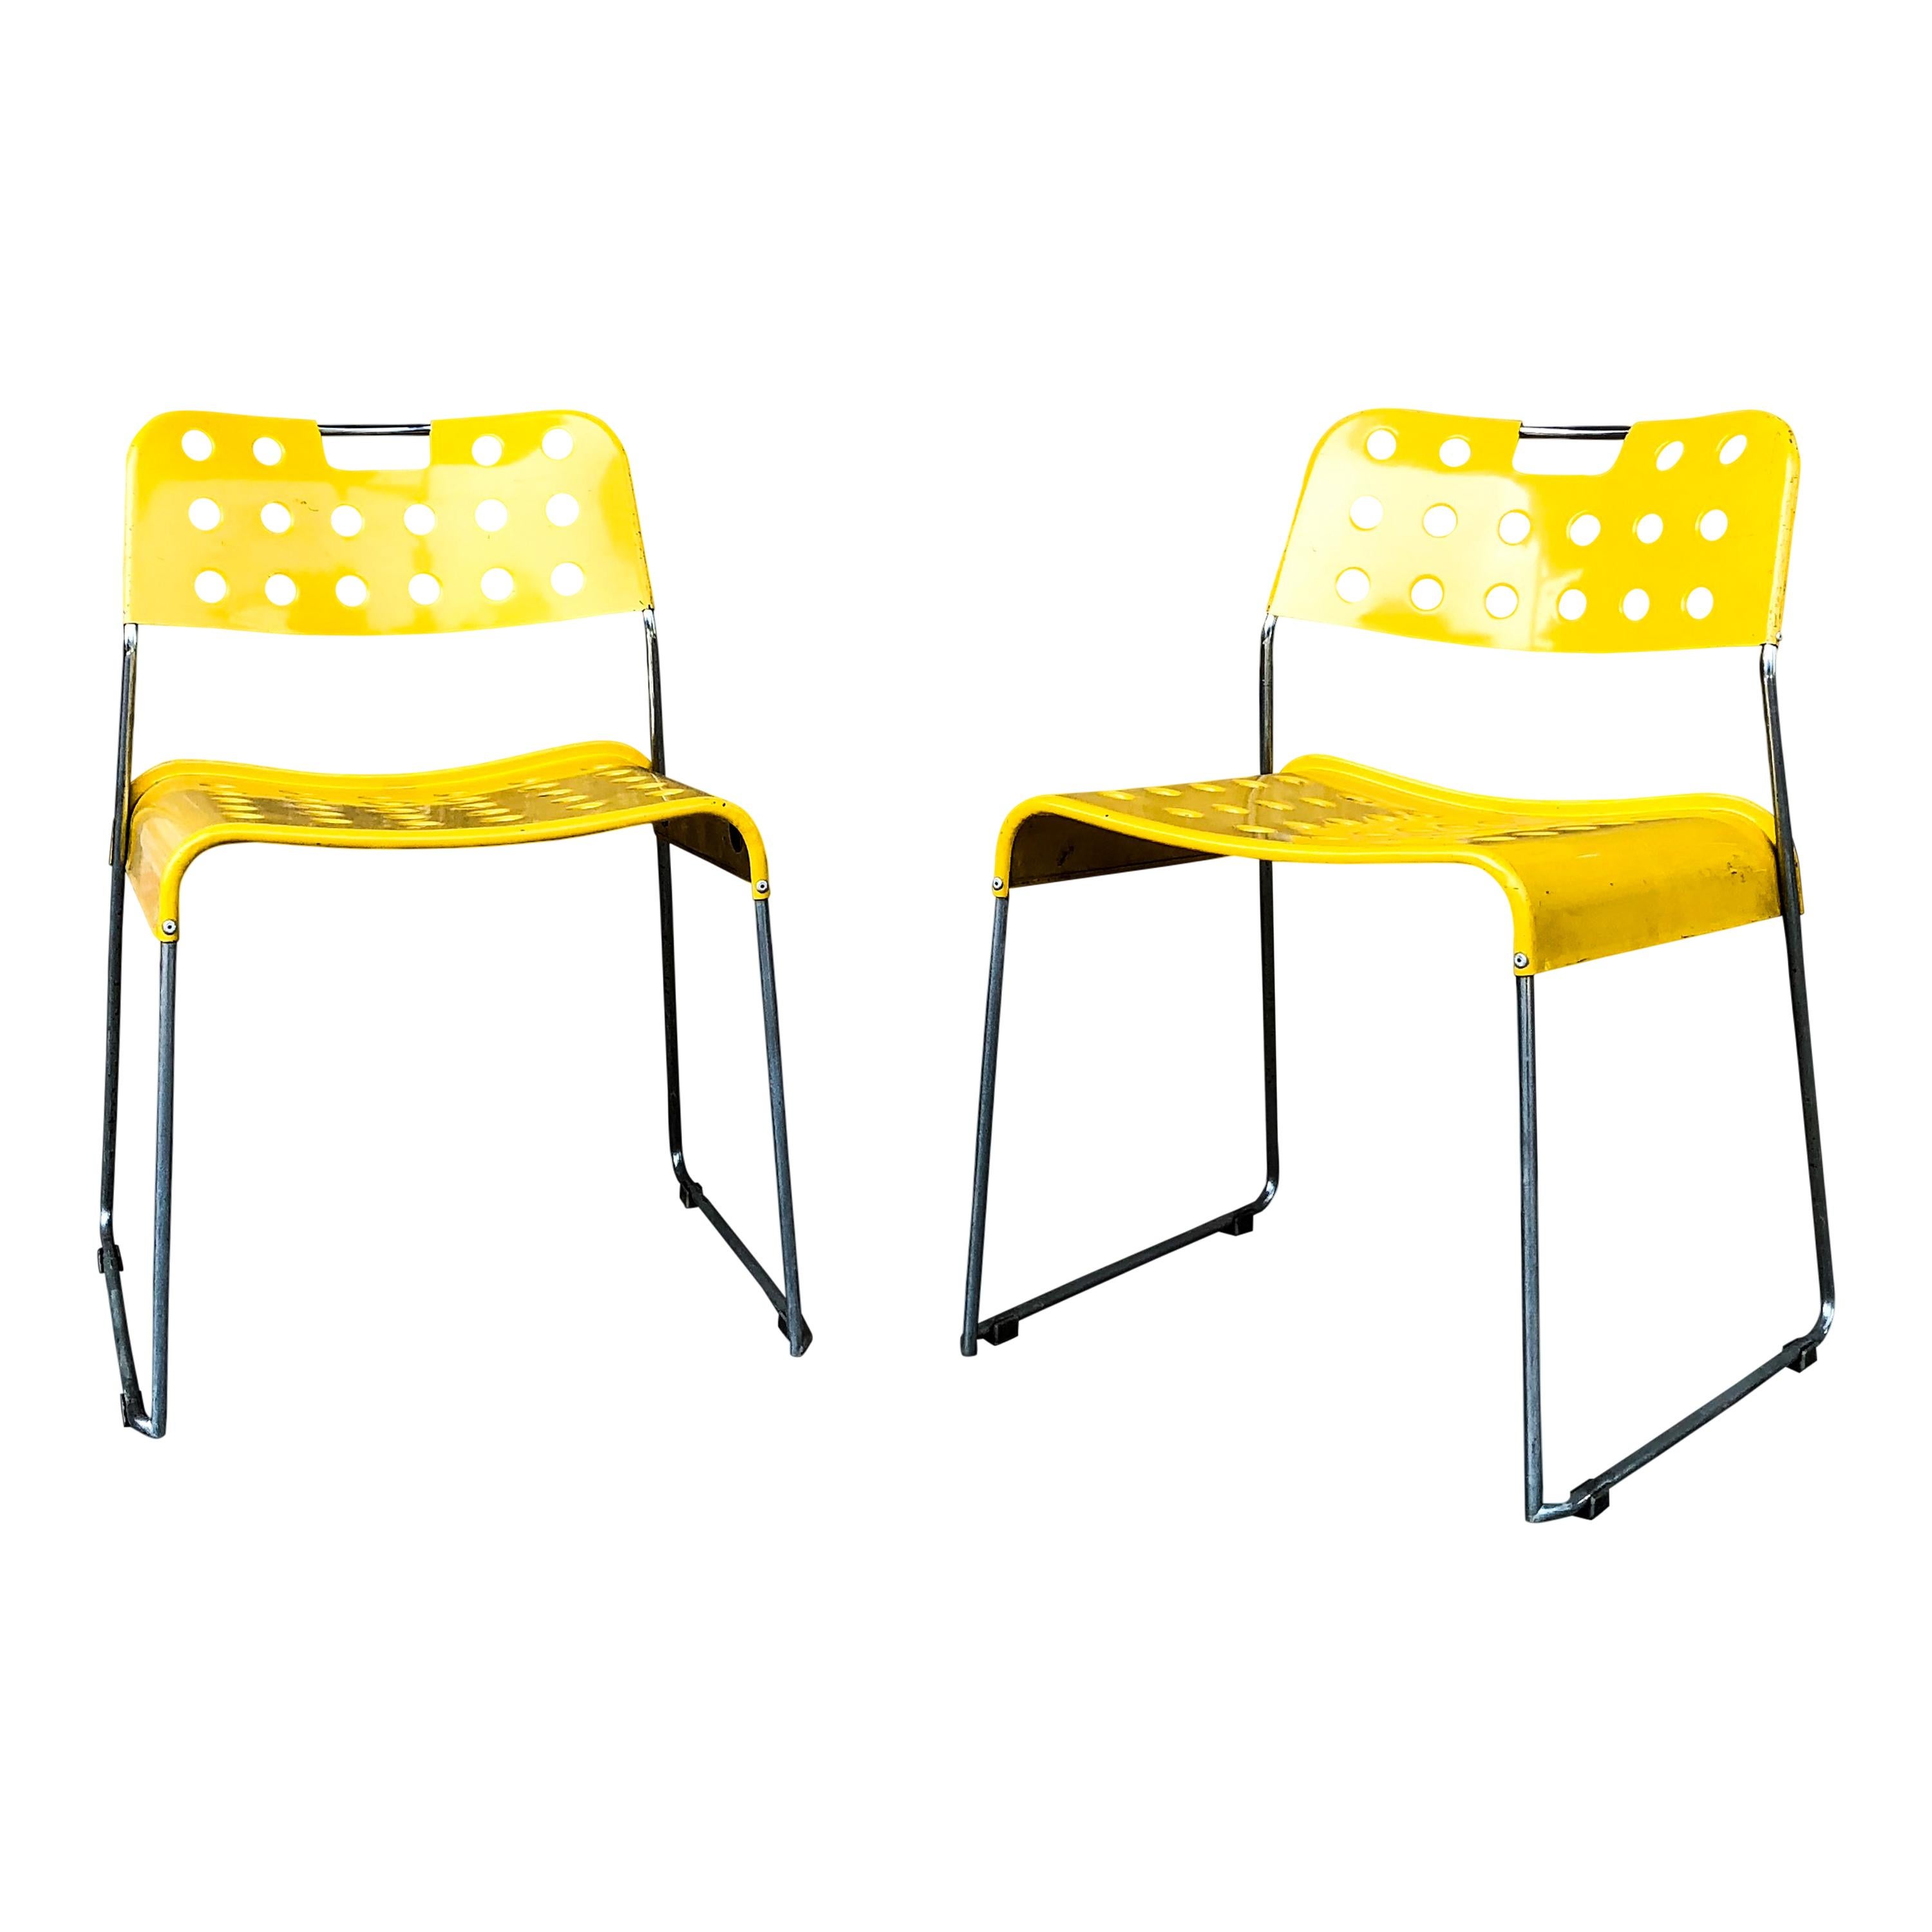 Rodney Kinsman Space Age Yellow Omstak Chair for Bieffeplast, 1971, Set of 6 For Sale 7